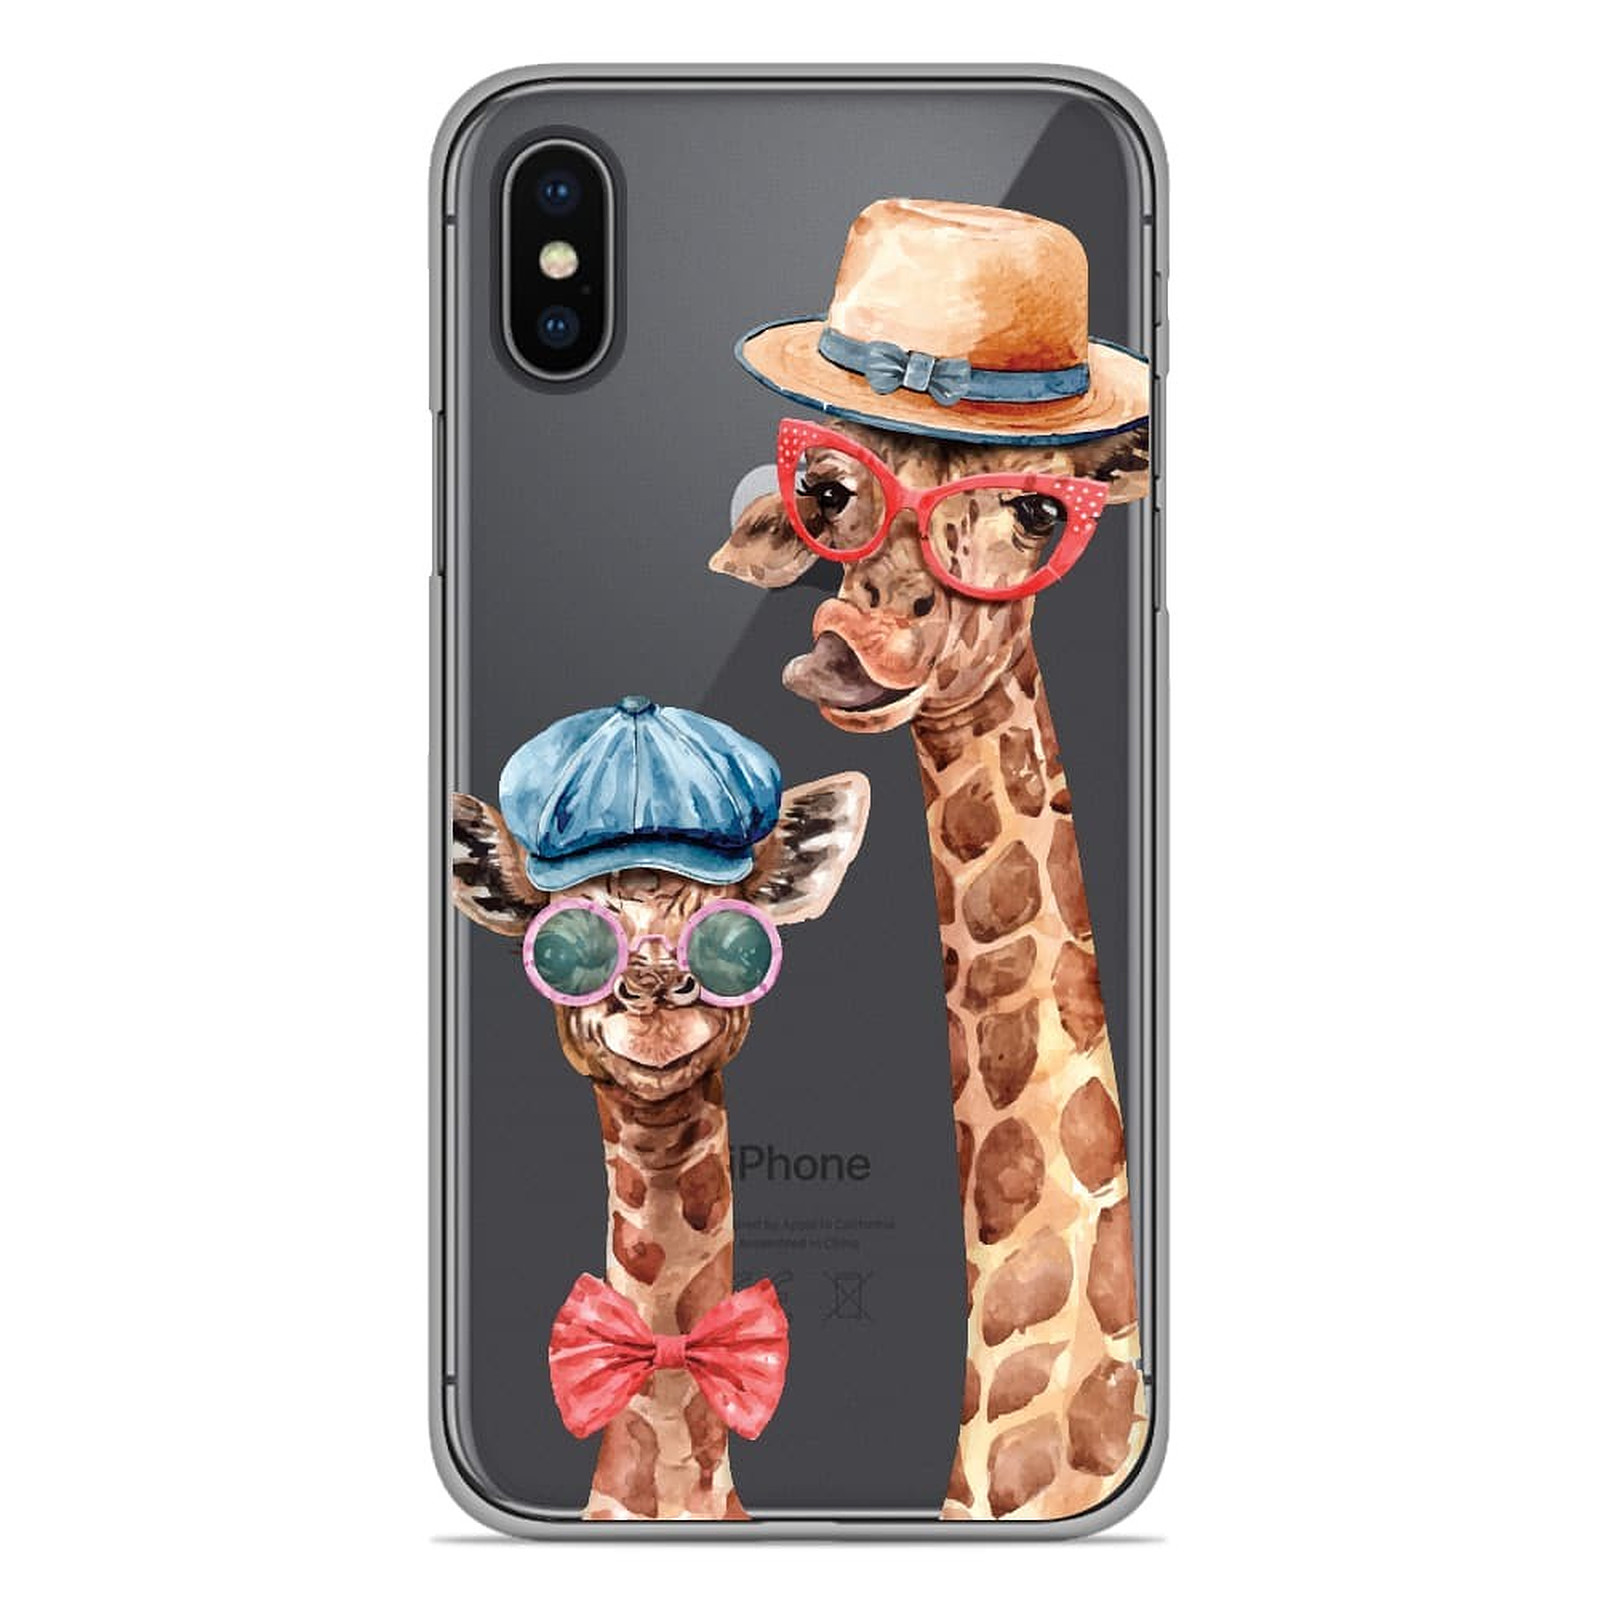 1001 Coques Coque silicone gel Apple iPhone X / XS motif Funny Girafe - Coque telephone 1001Coques